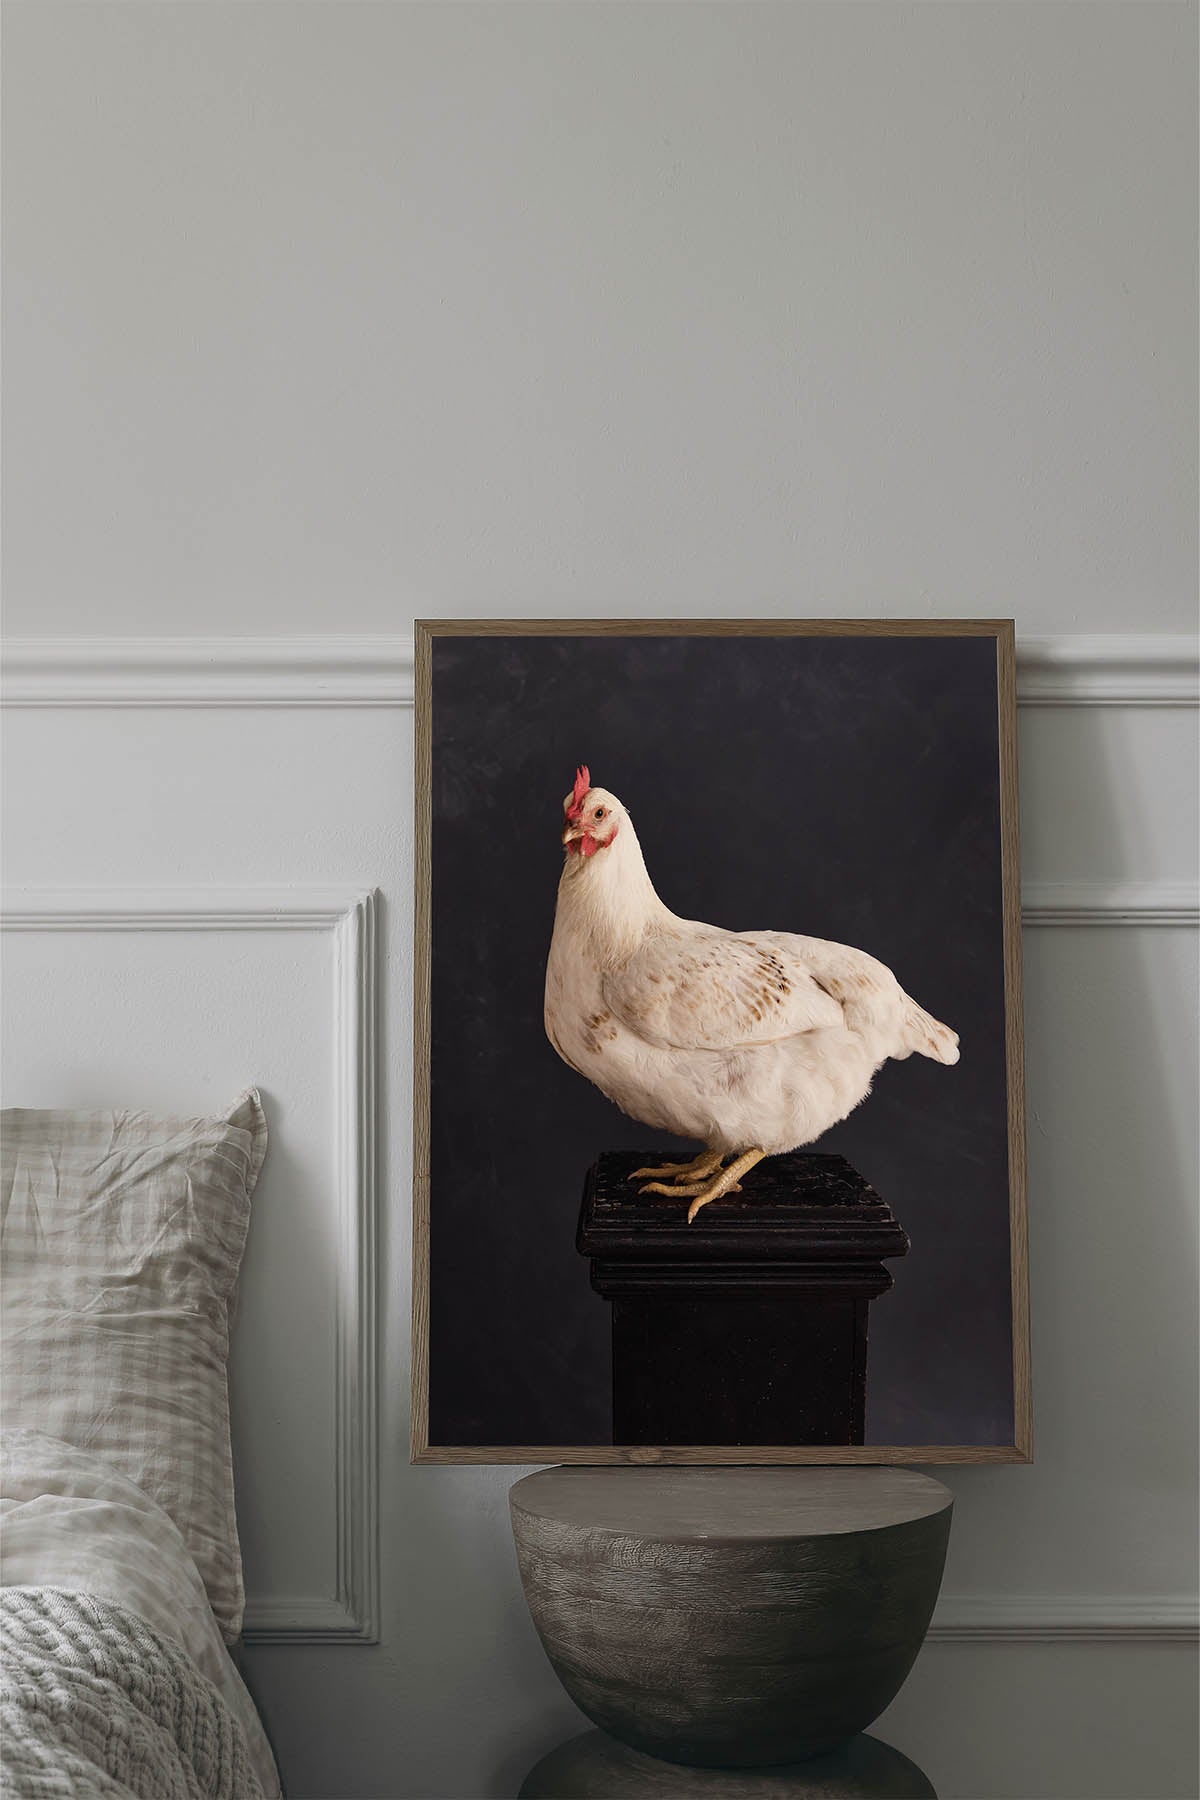 Fine Art Print Of A White Chicken Standing On A Black Plinth With A Black Background Framed On A Wall In An European Style Bedroom.